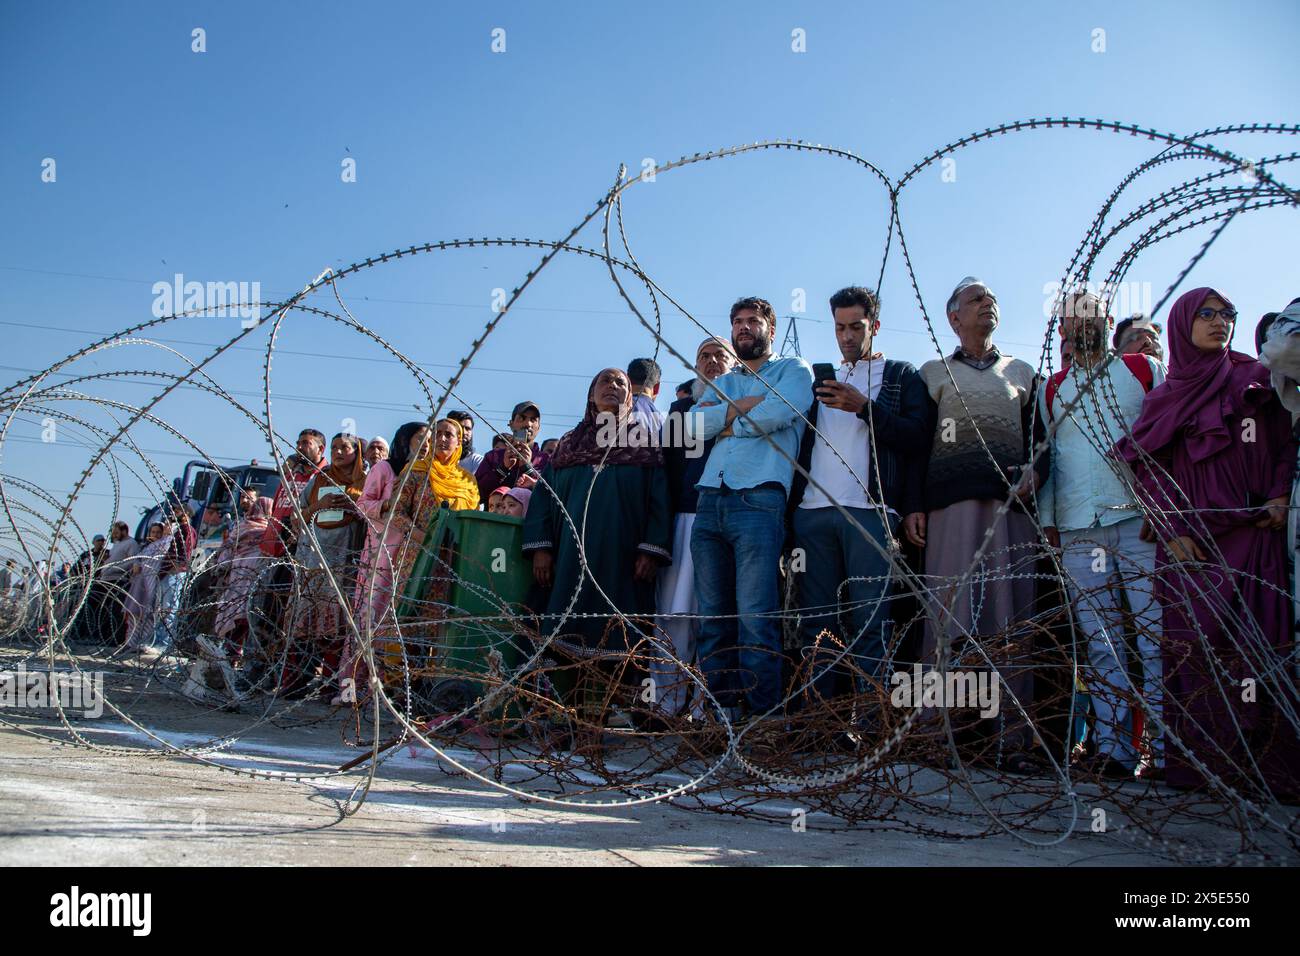 Relatives watch from behind concertina wire as Kashmiri Muslim pilgrims leave for the annual hajj pilgrimage to the holy city of Mecca in Srinagar. The first batch of Hajj pilgrims from Jammu and Kashmir will leave for Saudi Arabia from Srinagar International Airport on Thursday. Officials said that this year, 7008 pilgrims from Jammu and Kashmir will perform the holiest Muslim pilgrimage of Hajj in Saudi Arabia. (Photo by Faisal Bashir / SOPA Images/Sipa USA) Stock Photo